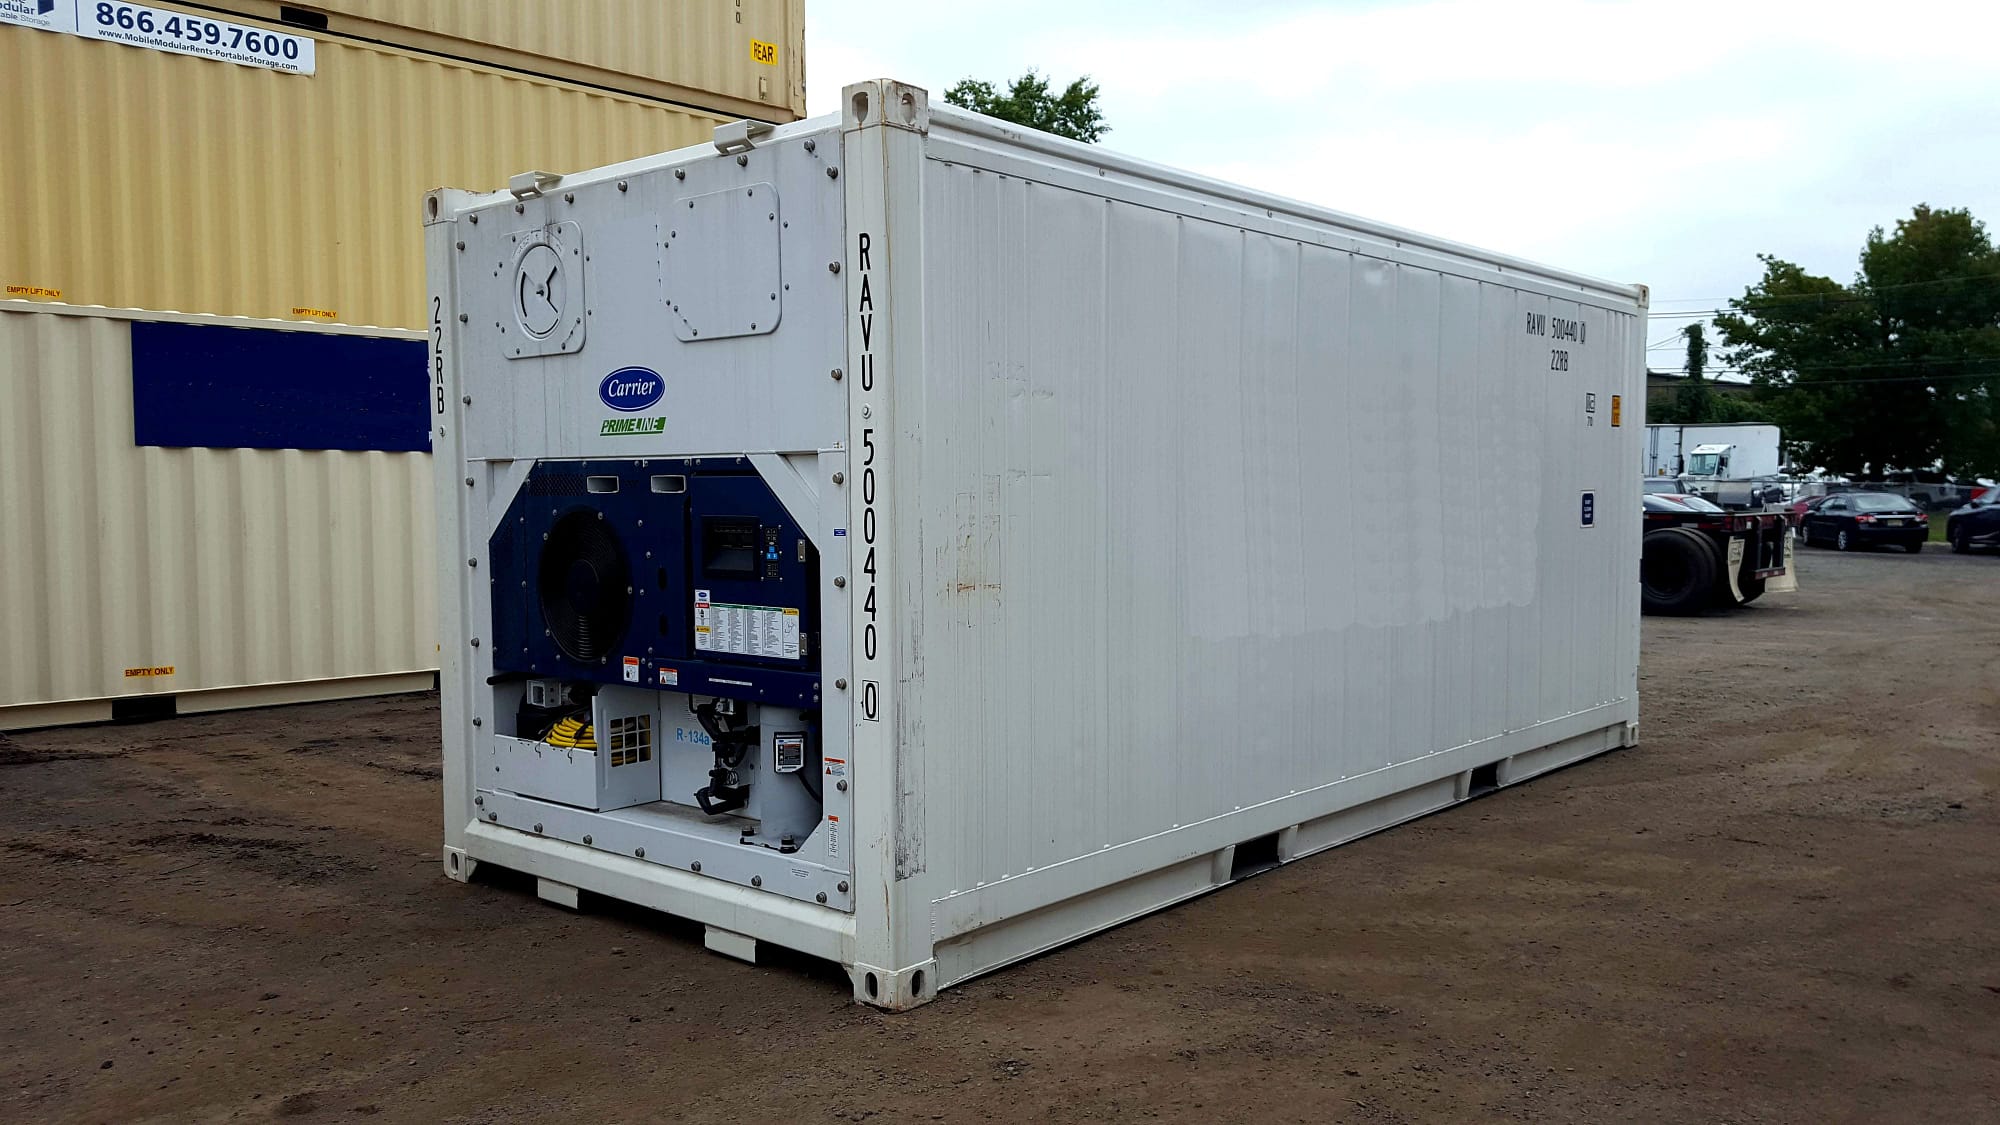 TRS sells new running refrigeration ocntainers in 20ft and 40ft lengths.